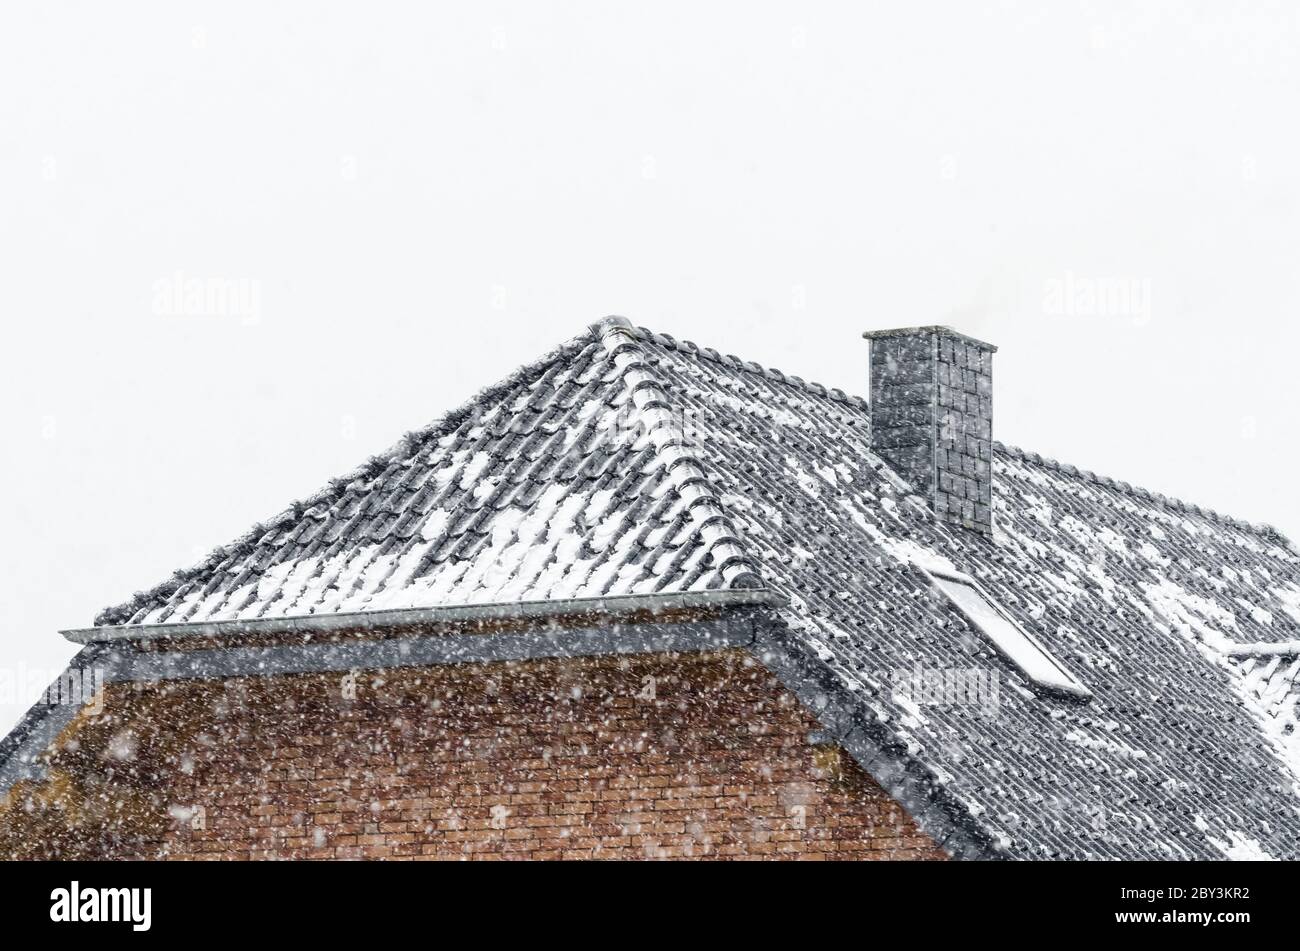 Snow covered roof and chimney of a house during heavy snowfall in wintertime in Germany Stock Photo